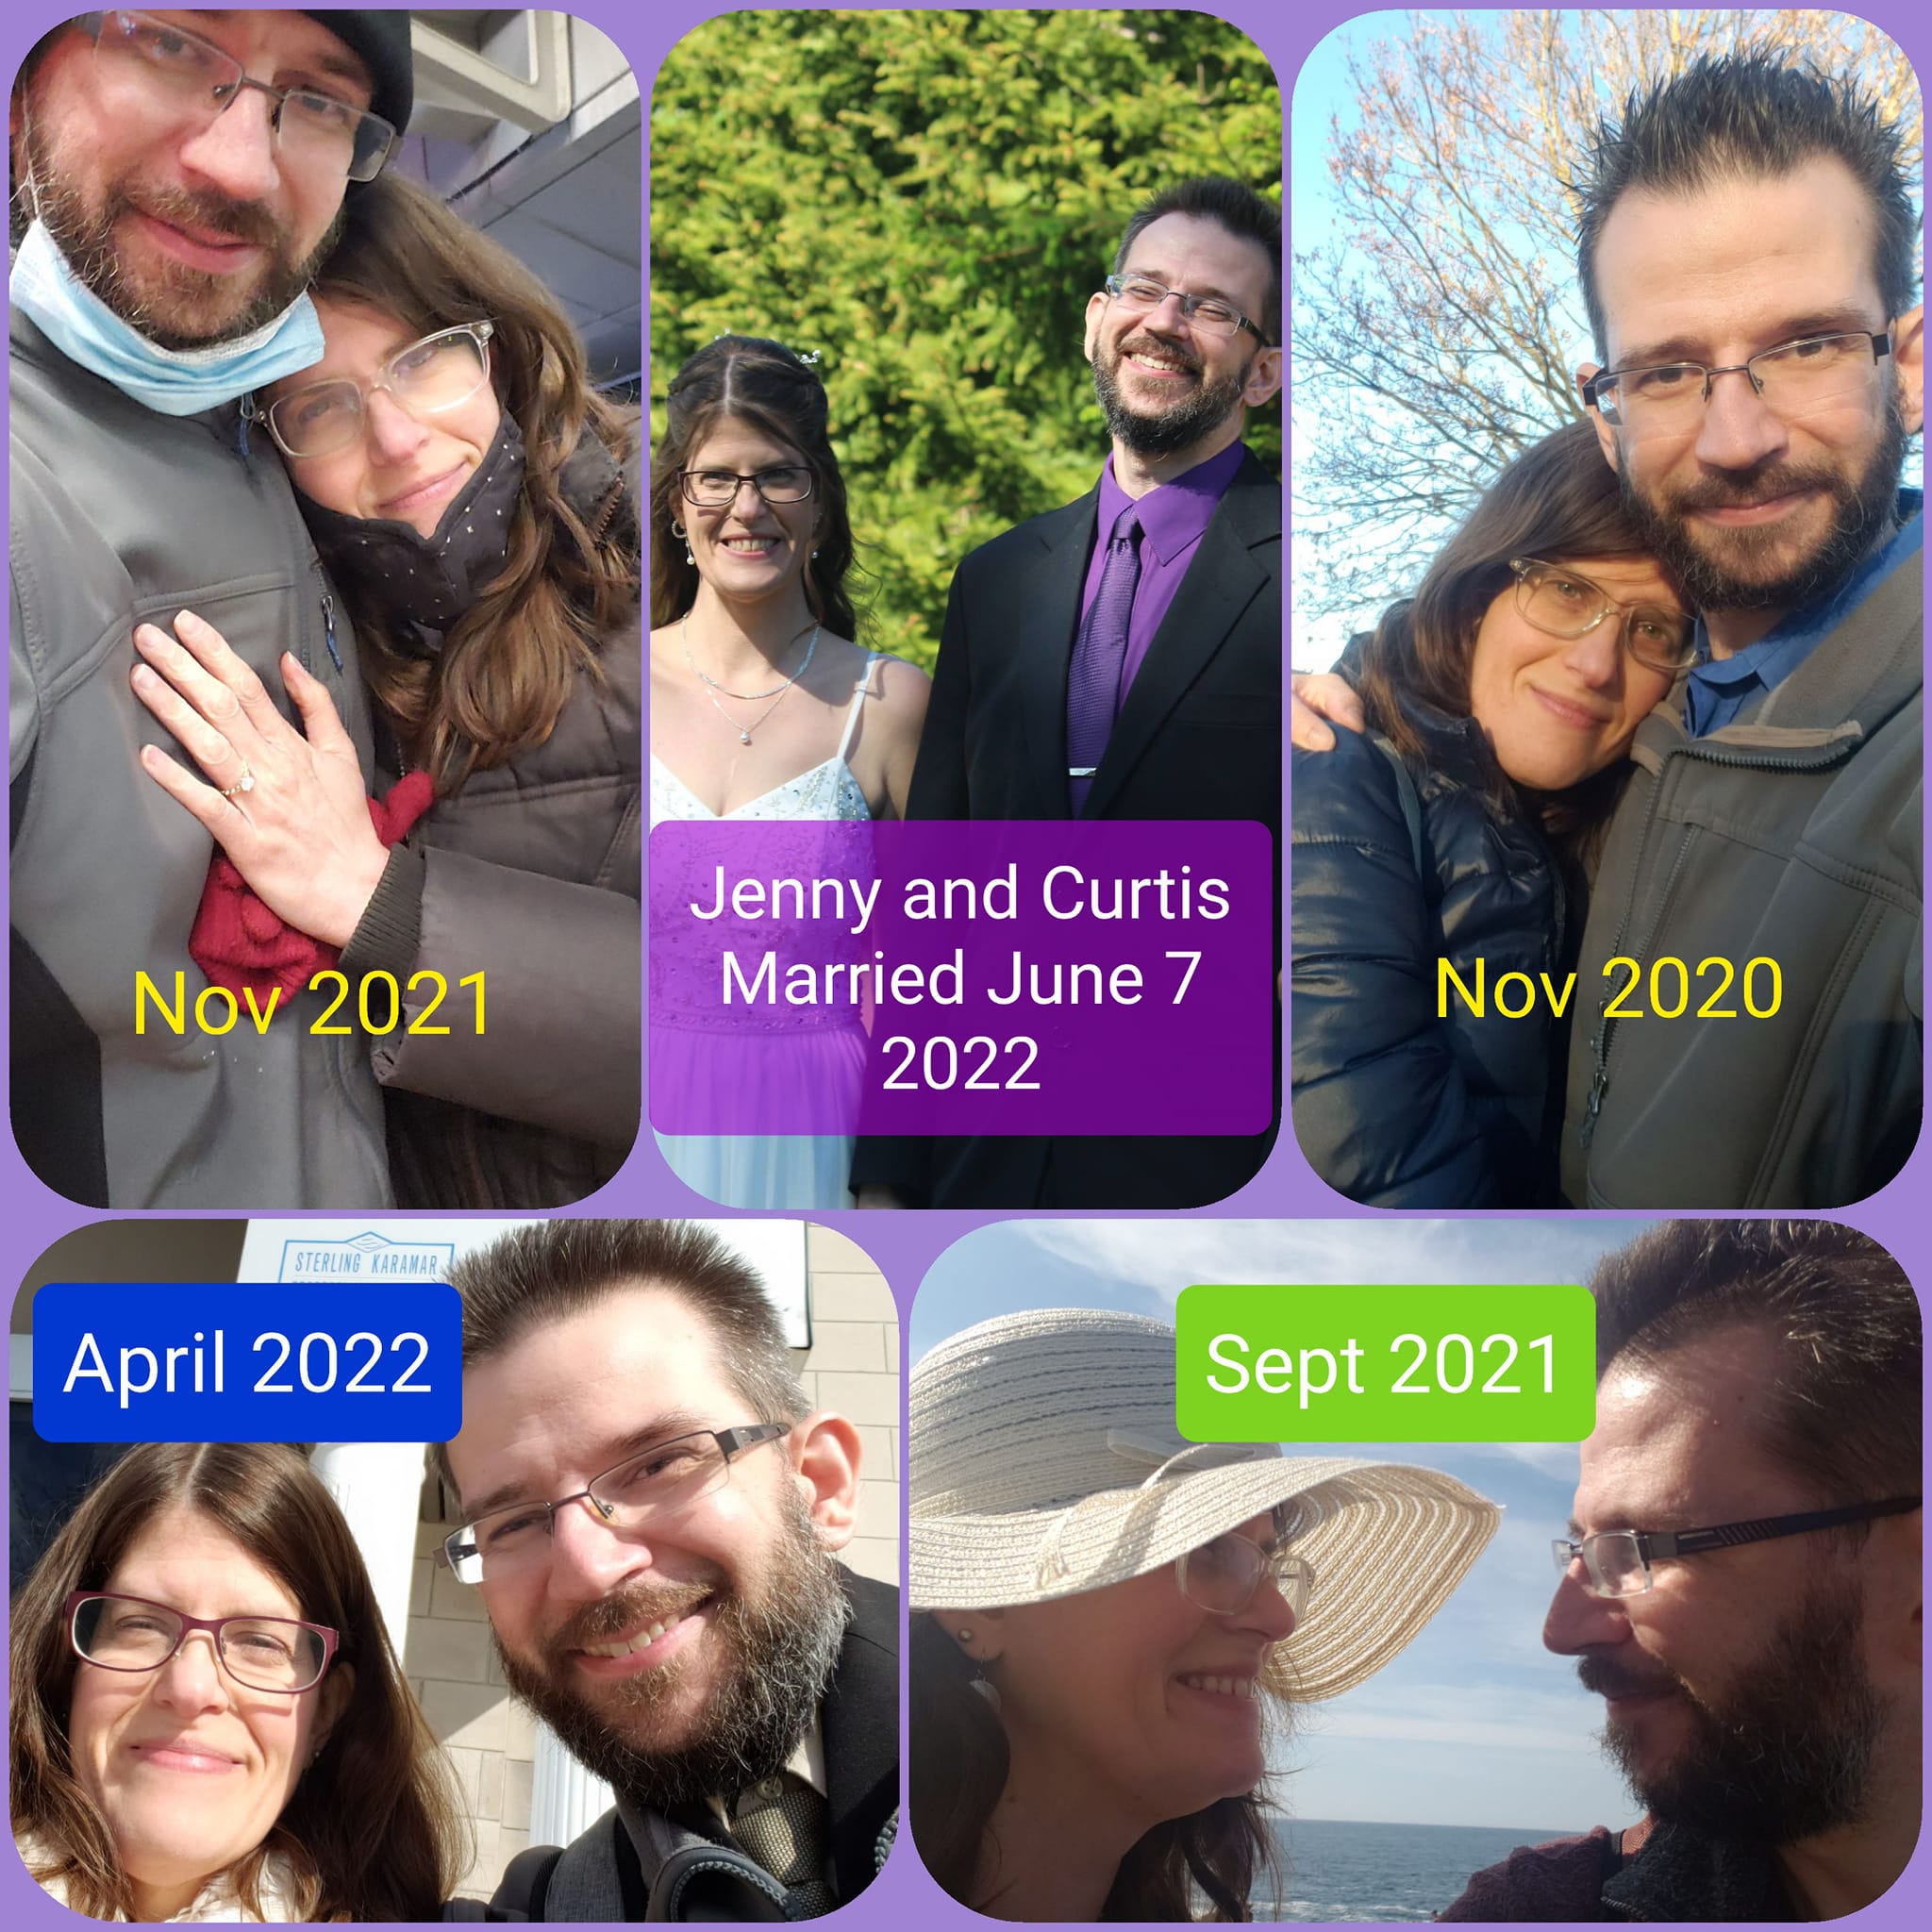 Collage of a Christian couple's relationship, including their marriage